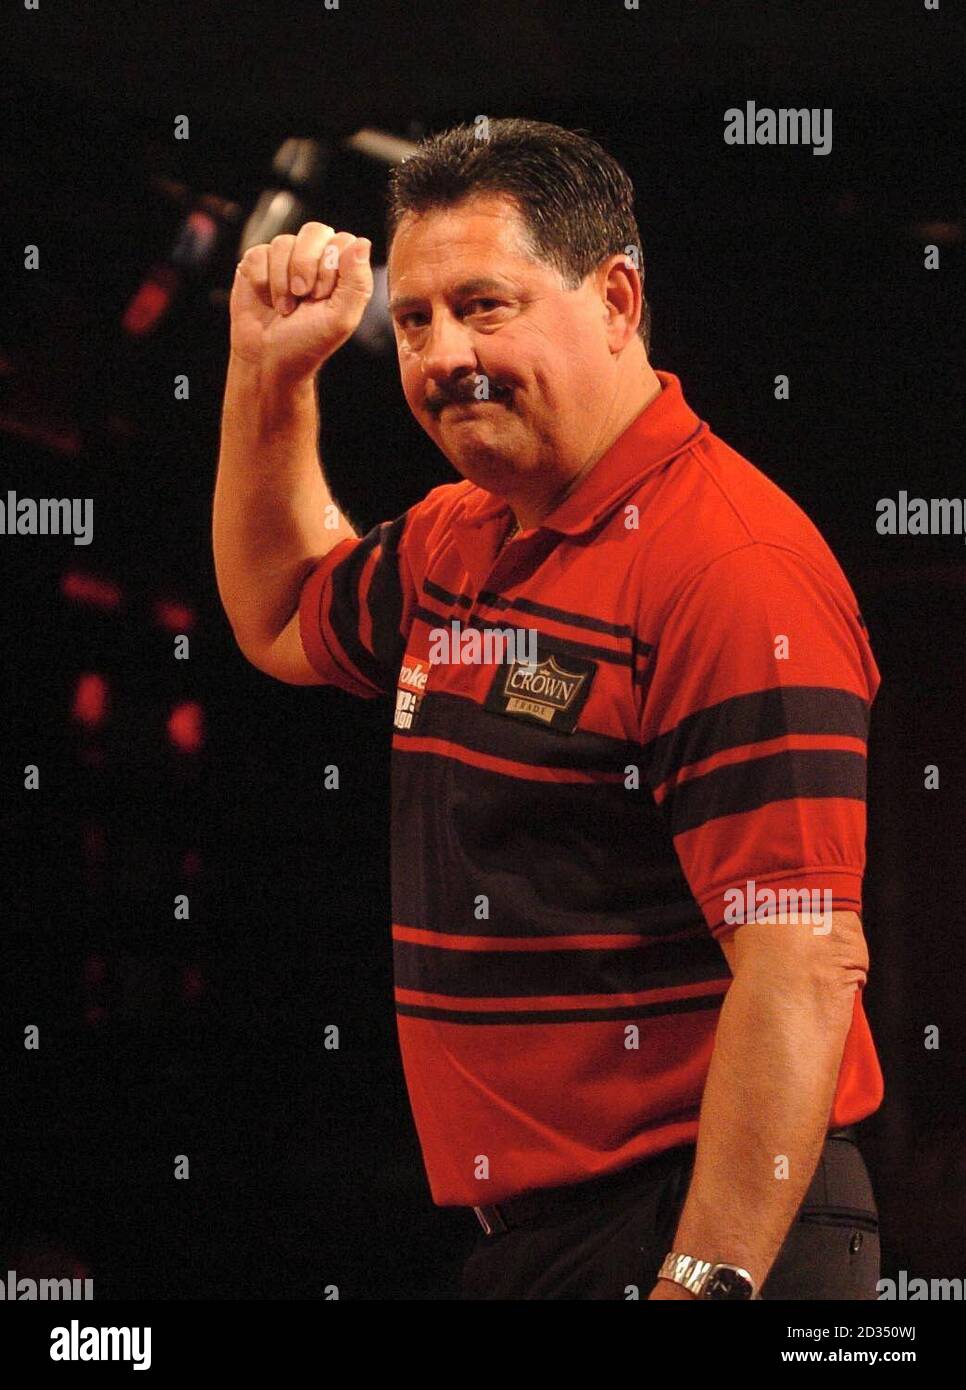 Dennis Priestley celebrates his win over Josephus Schenk in the first round during the PDC Ladbrokes.com World Championships at Purfleet, Essex. Stock Photo